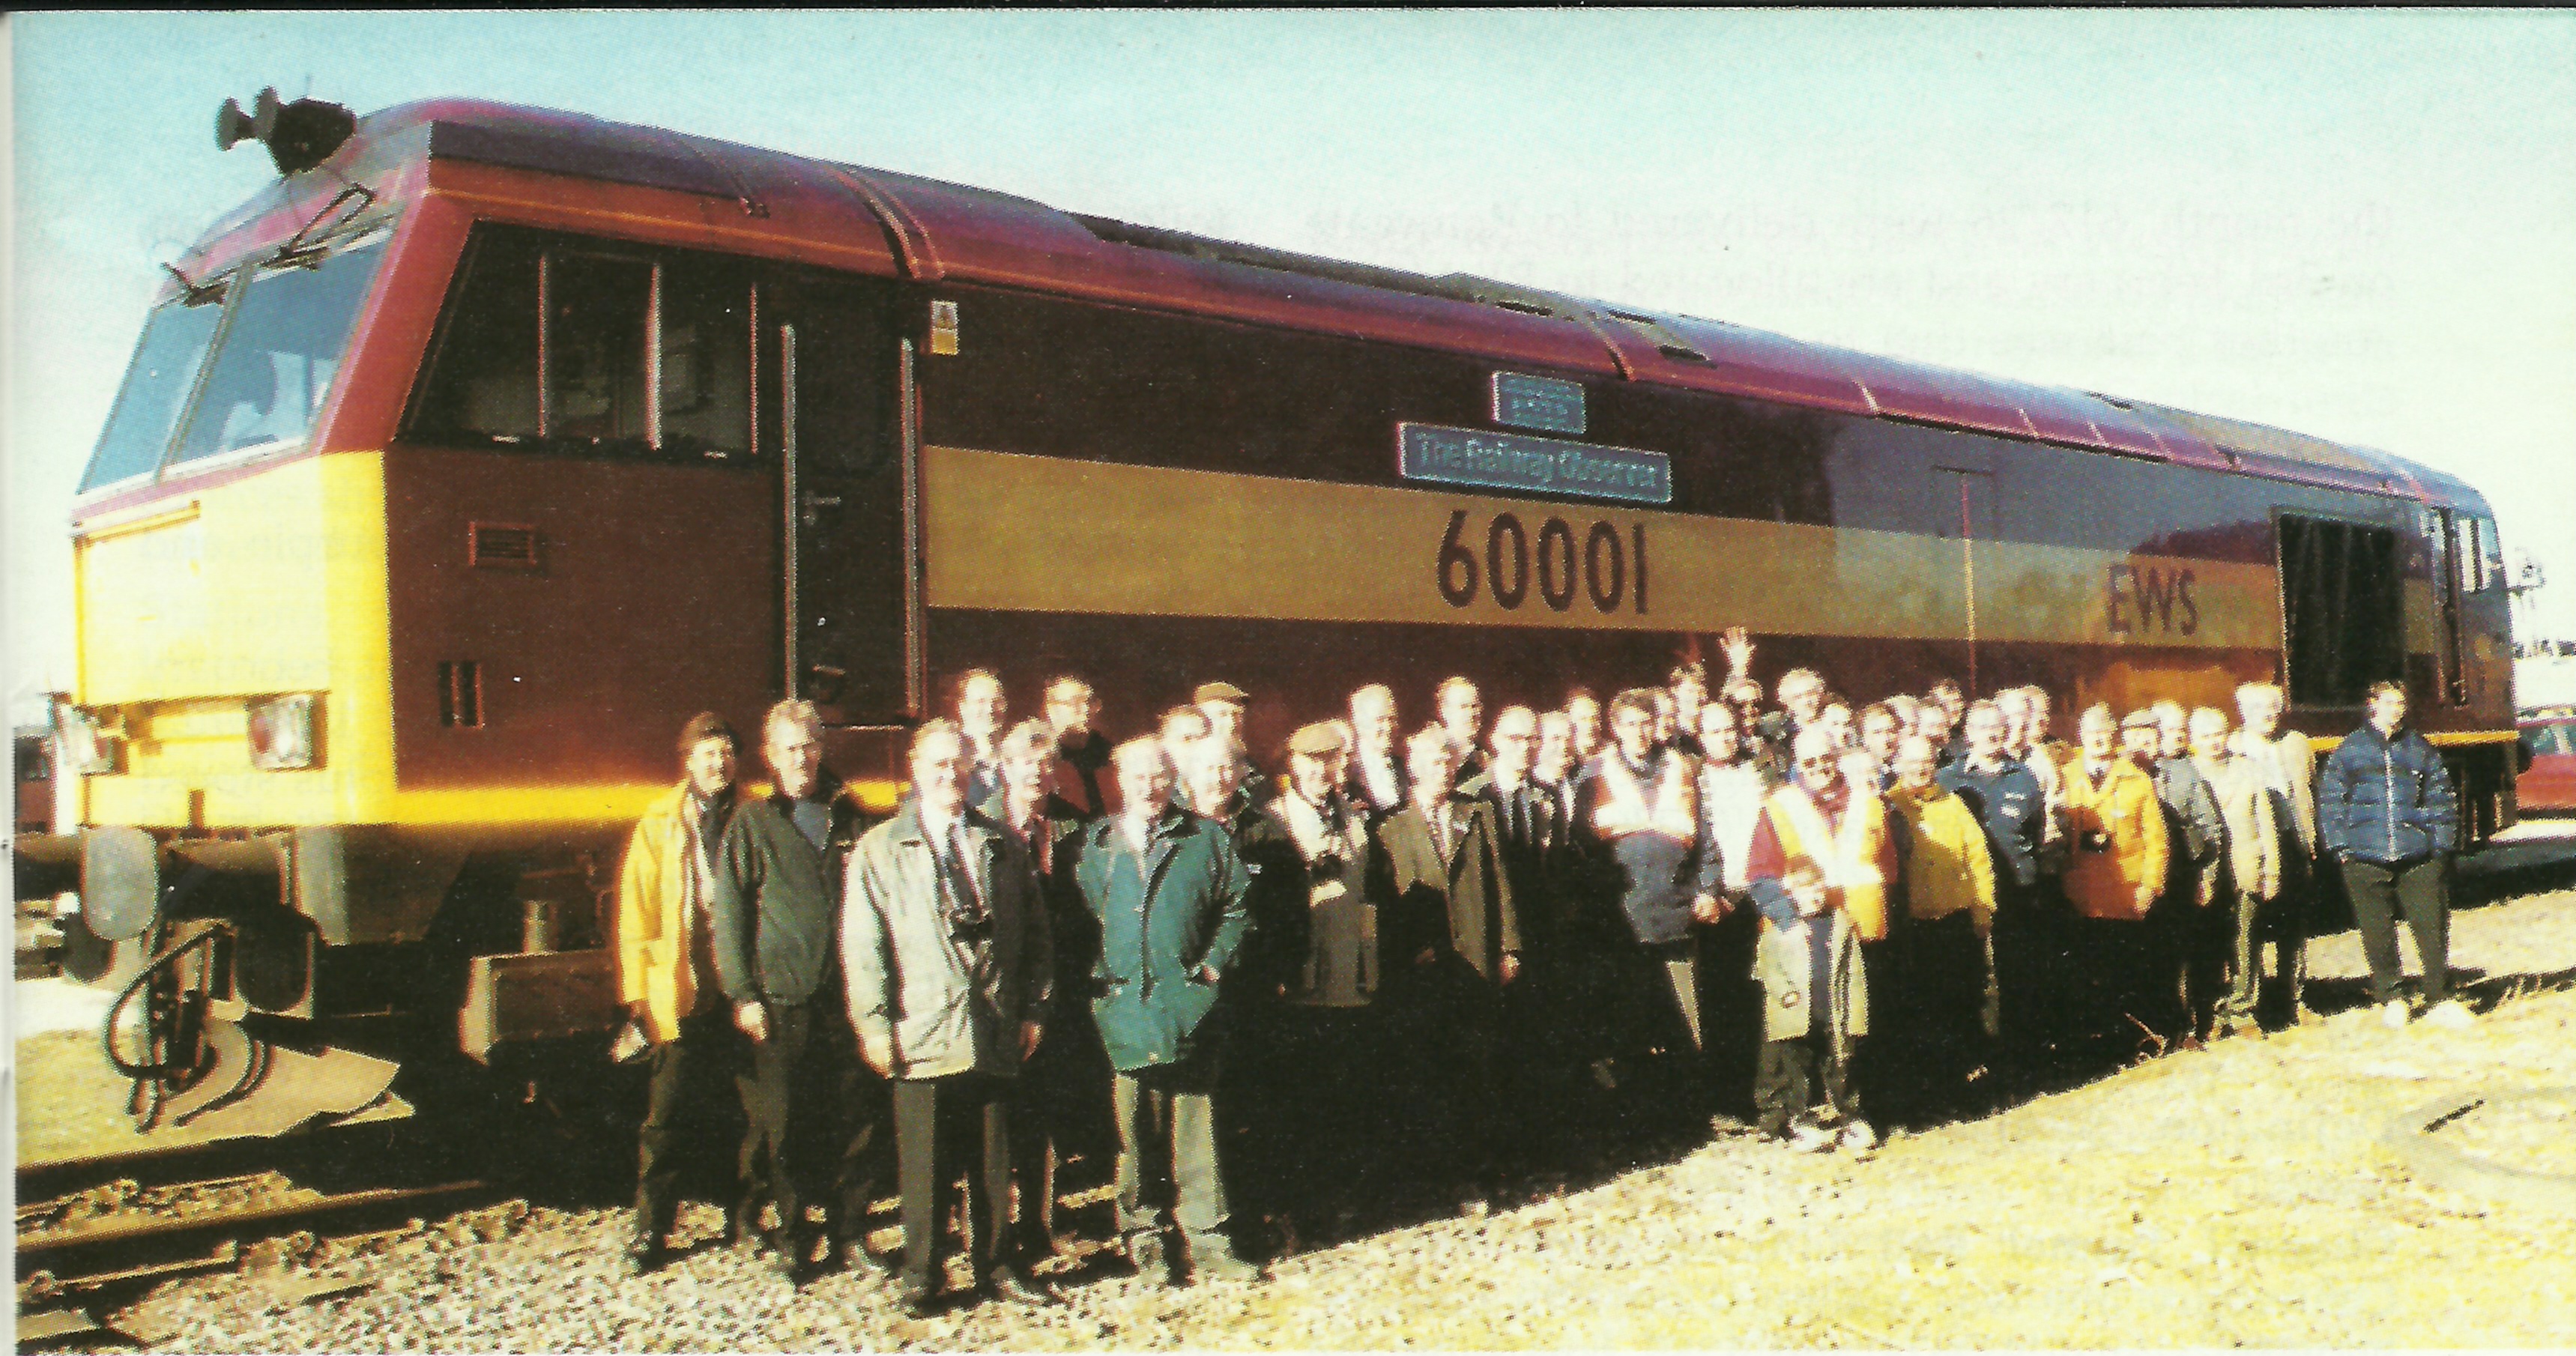 60001 The Railway Observer at the ceremony held at Toton on 23rd February 2001. Brian Morrison
Each of the Society’s Branches was invited to send a representative to the naming ceremony; 18 were able to do so along with some members of the Management Committee.
